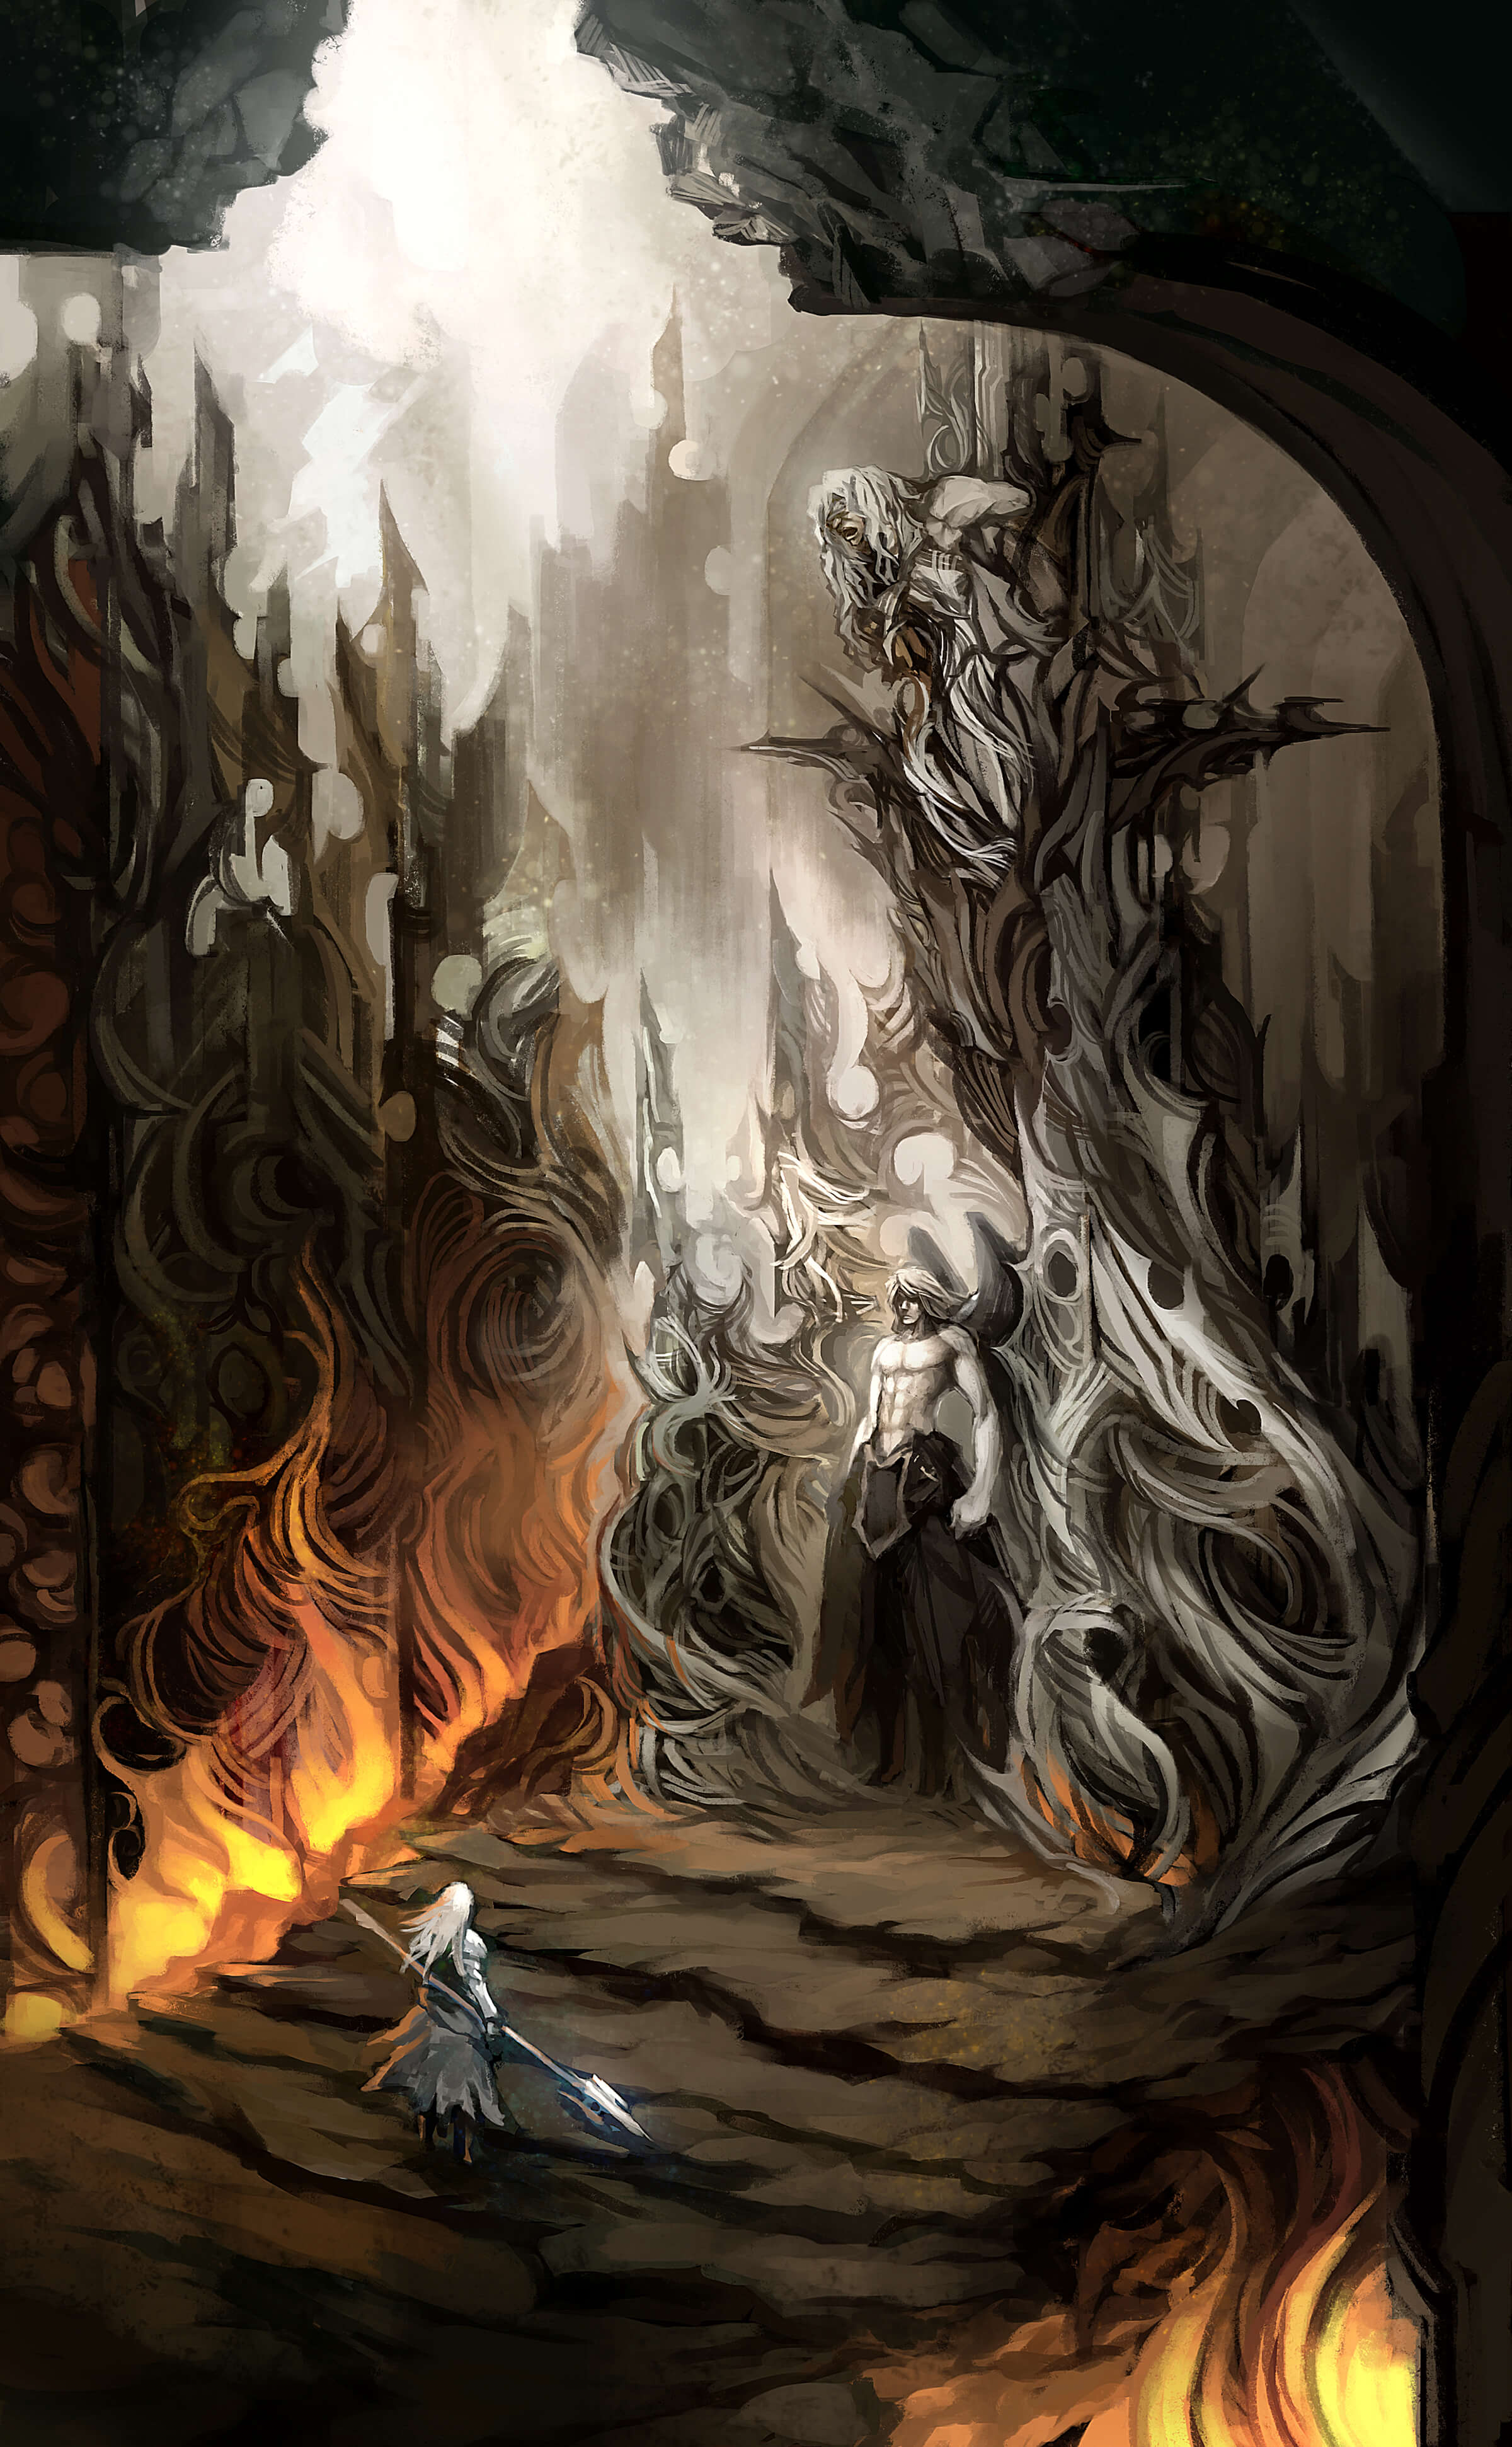 In a dark, flame-lit cavern, a white-haired figure approaches a taller figure standing atop an adorned stone pedestal.